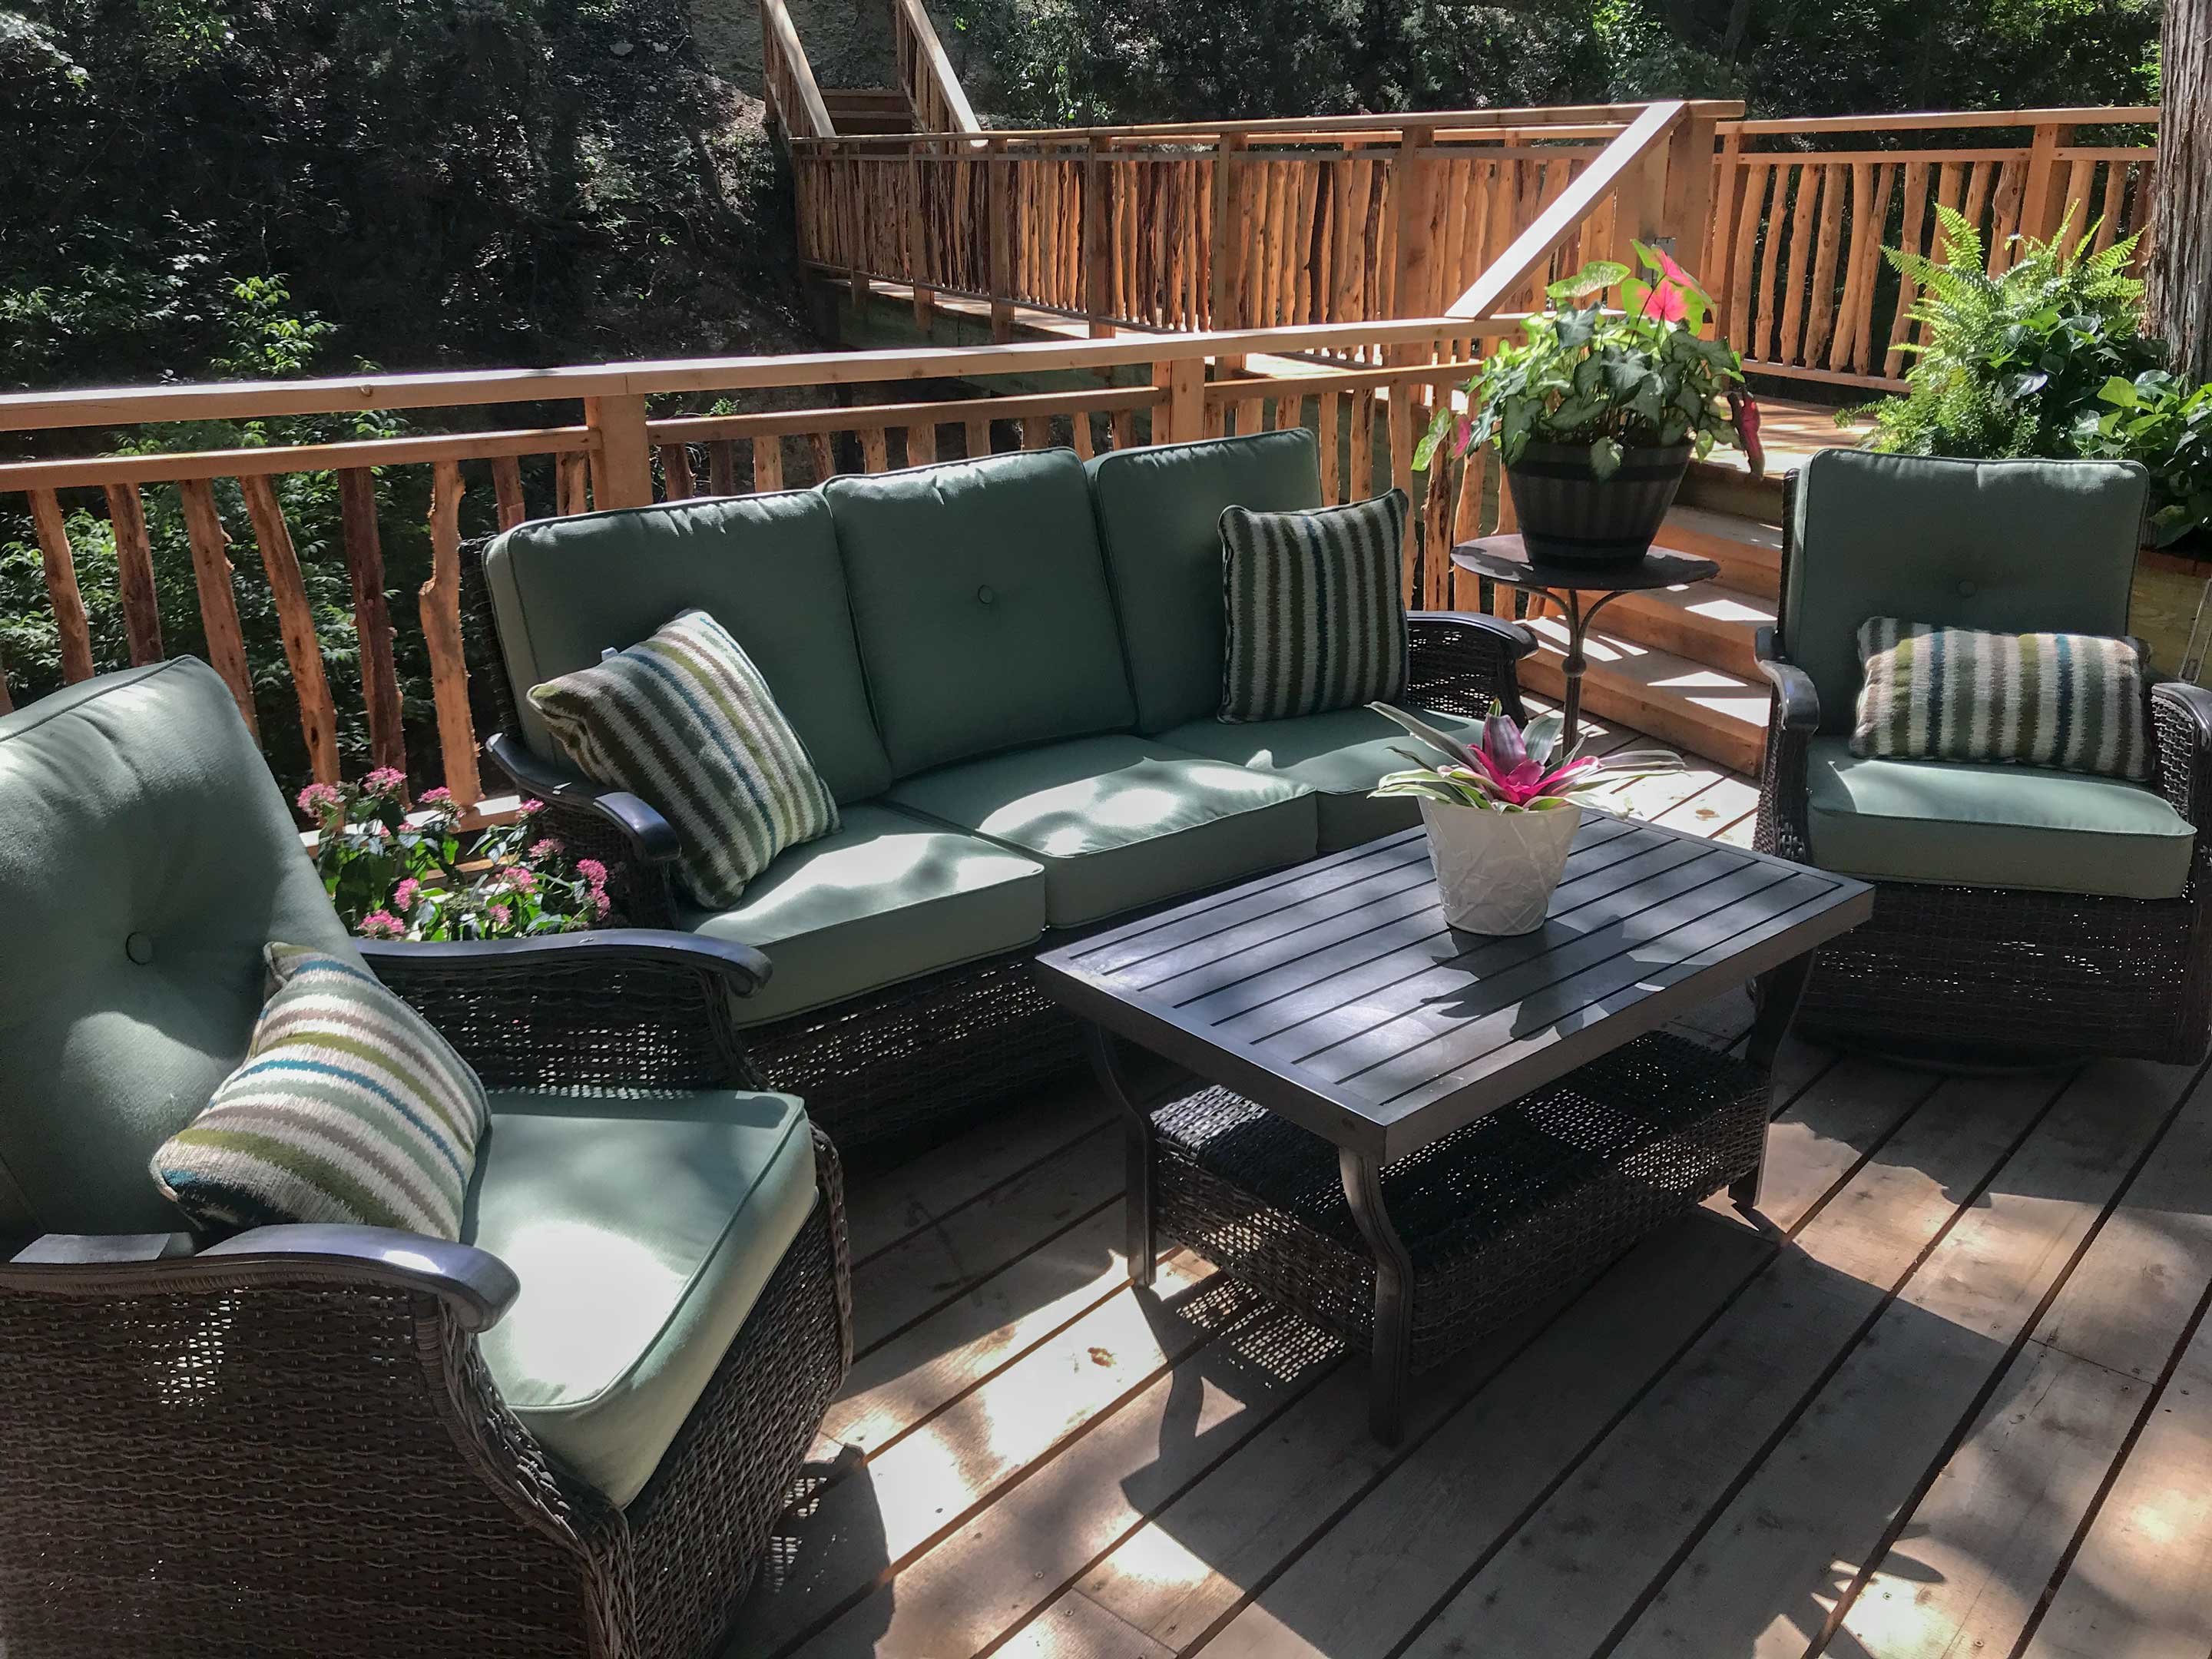 Sitting area on a deck